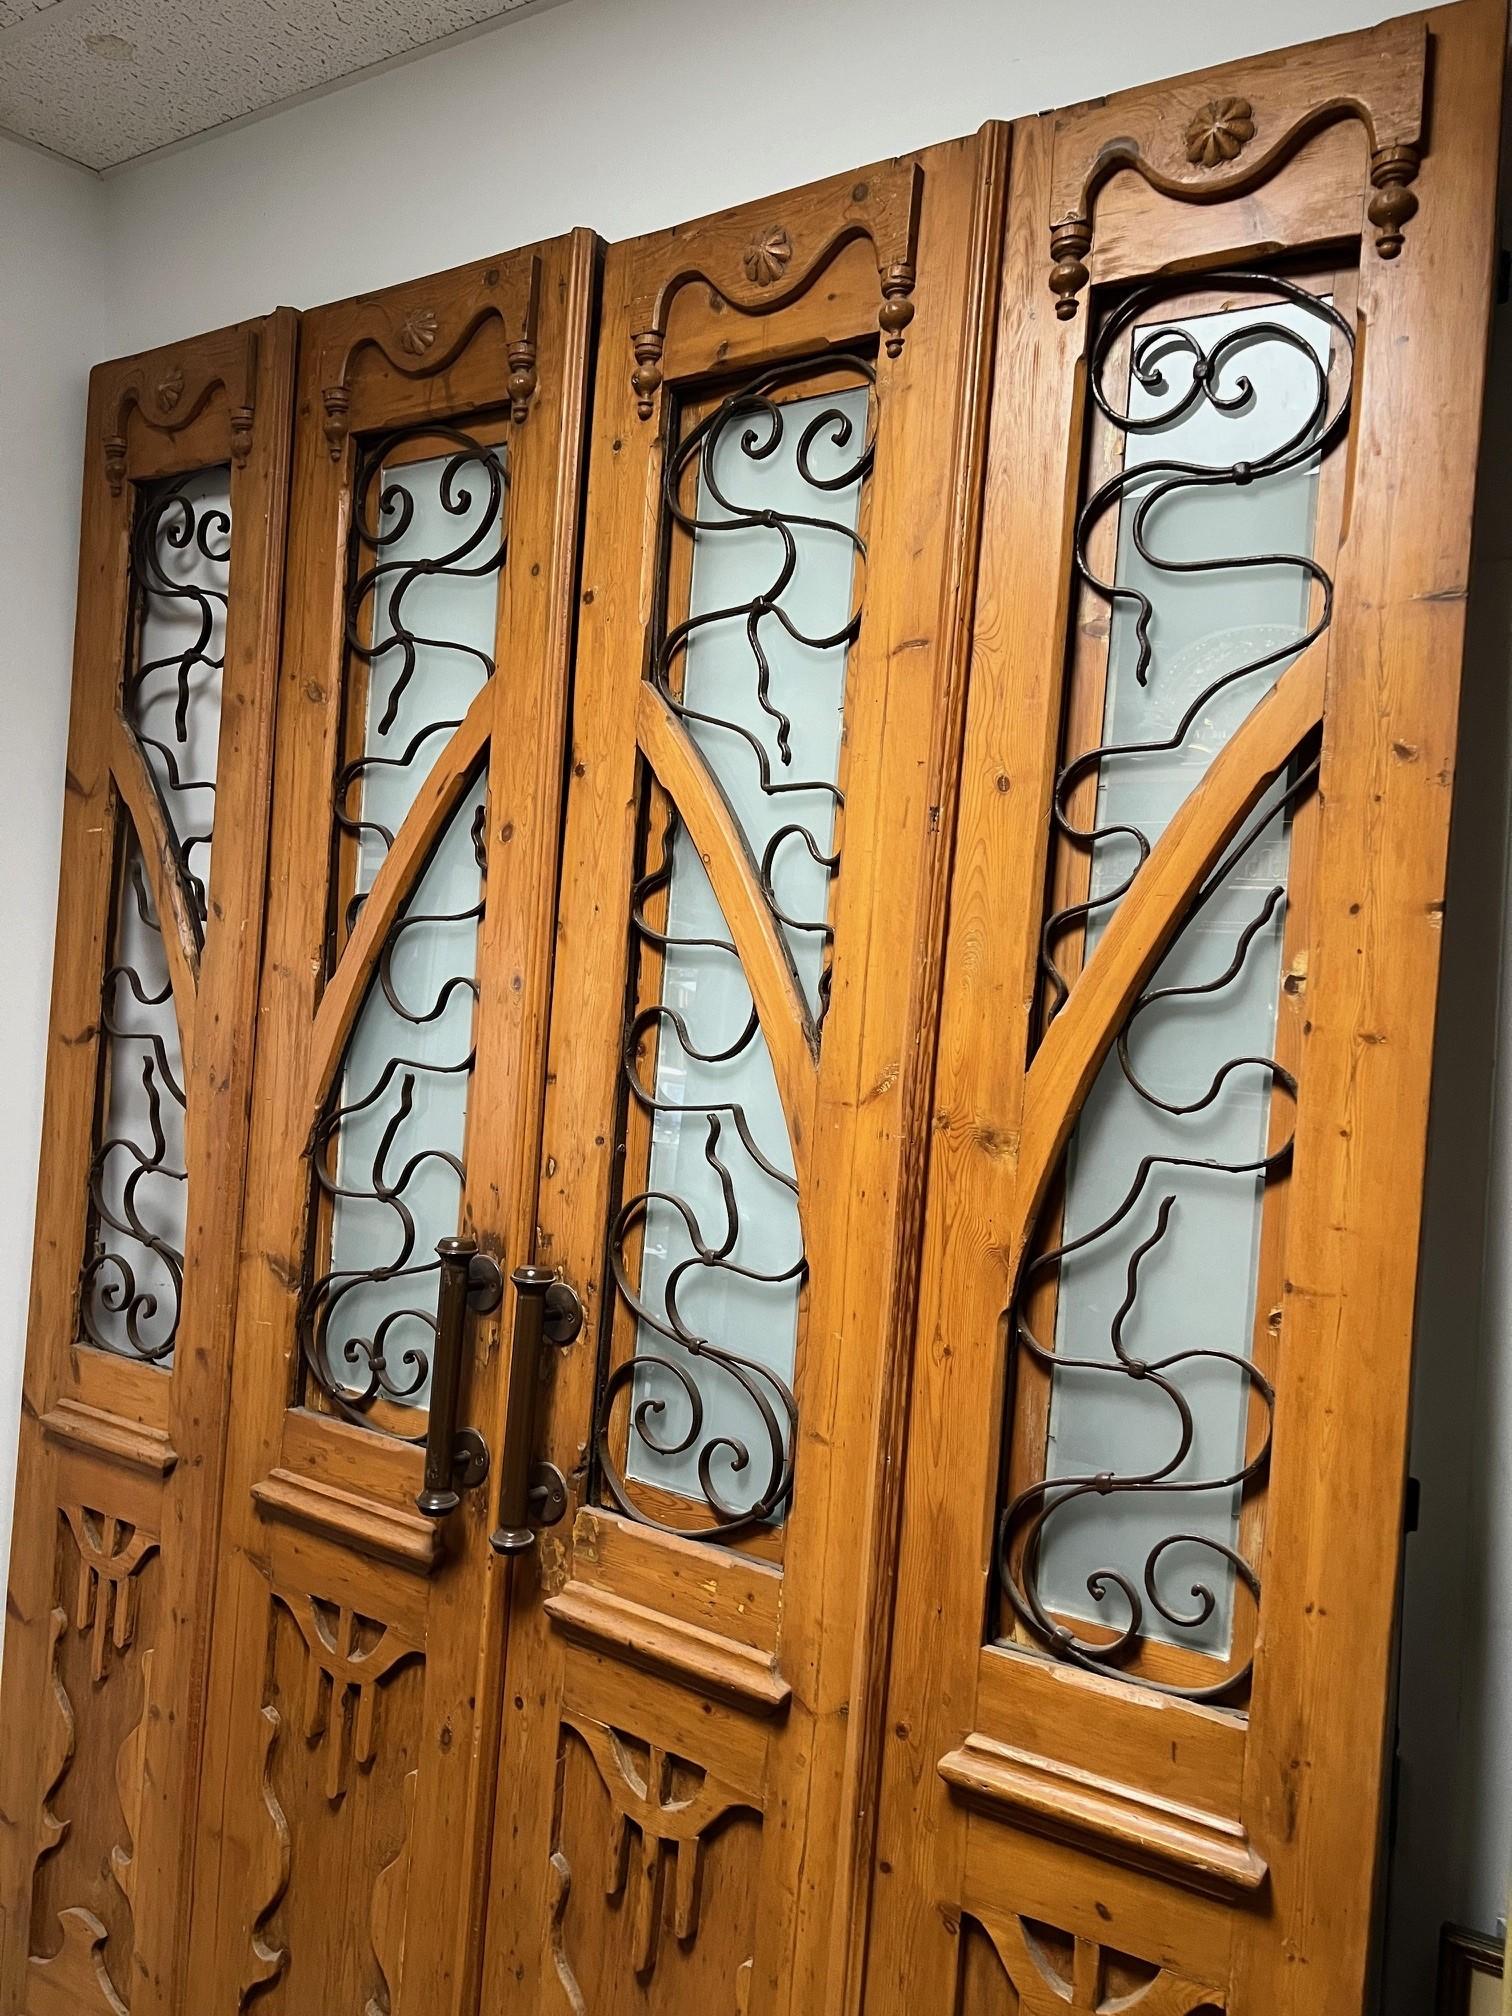 This is a great set of four antique doors wood with decorative iron panels. The set was imported from Egypt and were produced at a time in the early 1900s when French architecture and style had a great influence on the Egyptian culture, especially